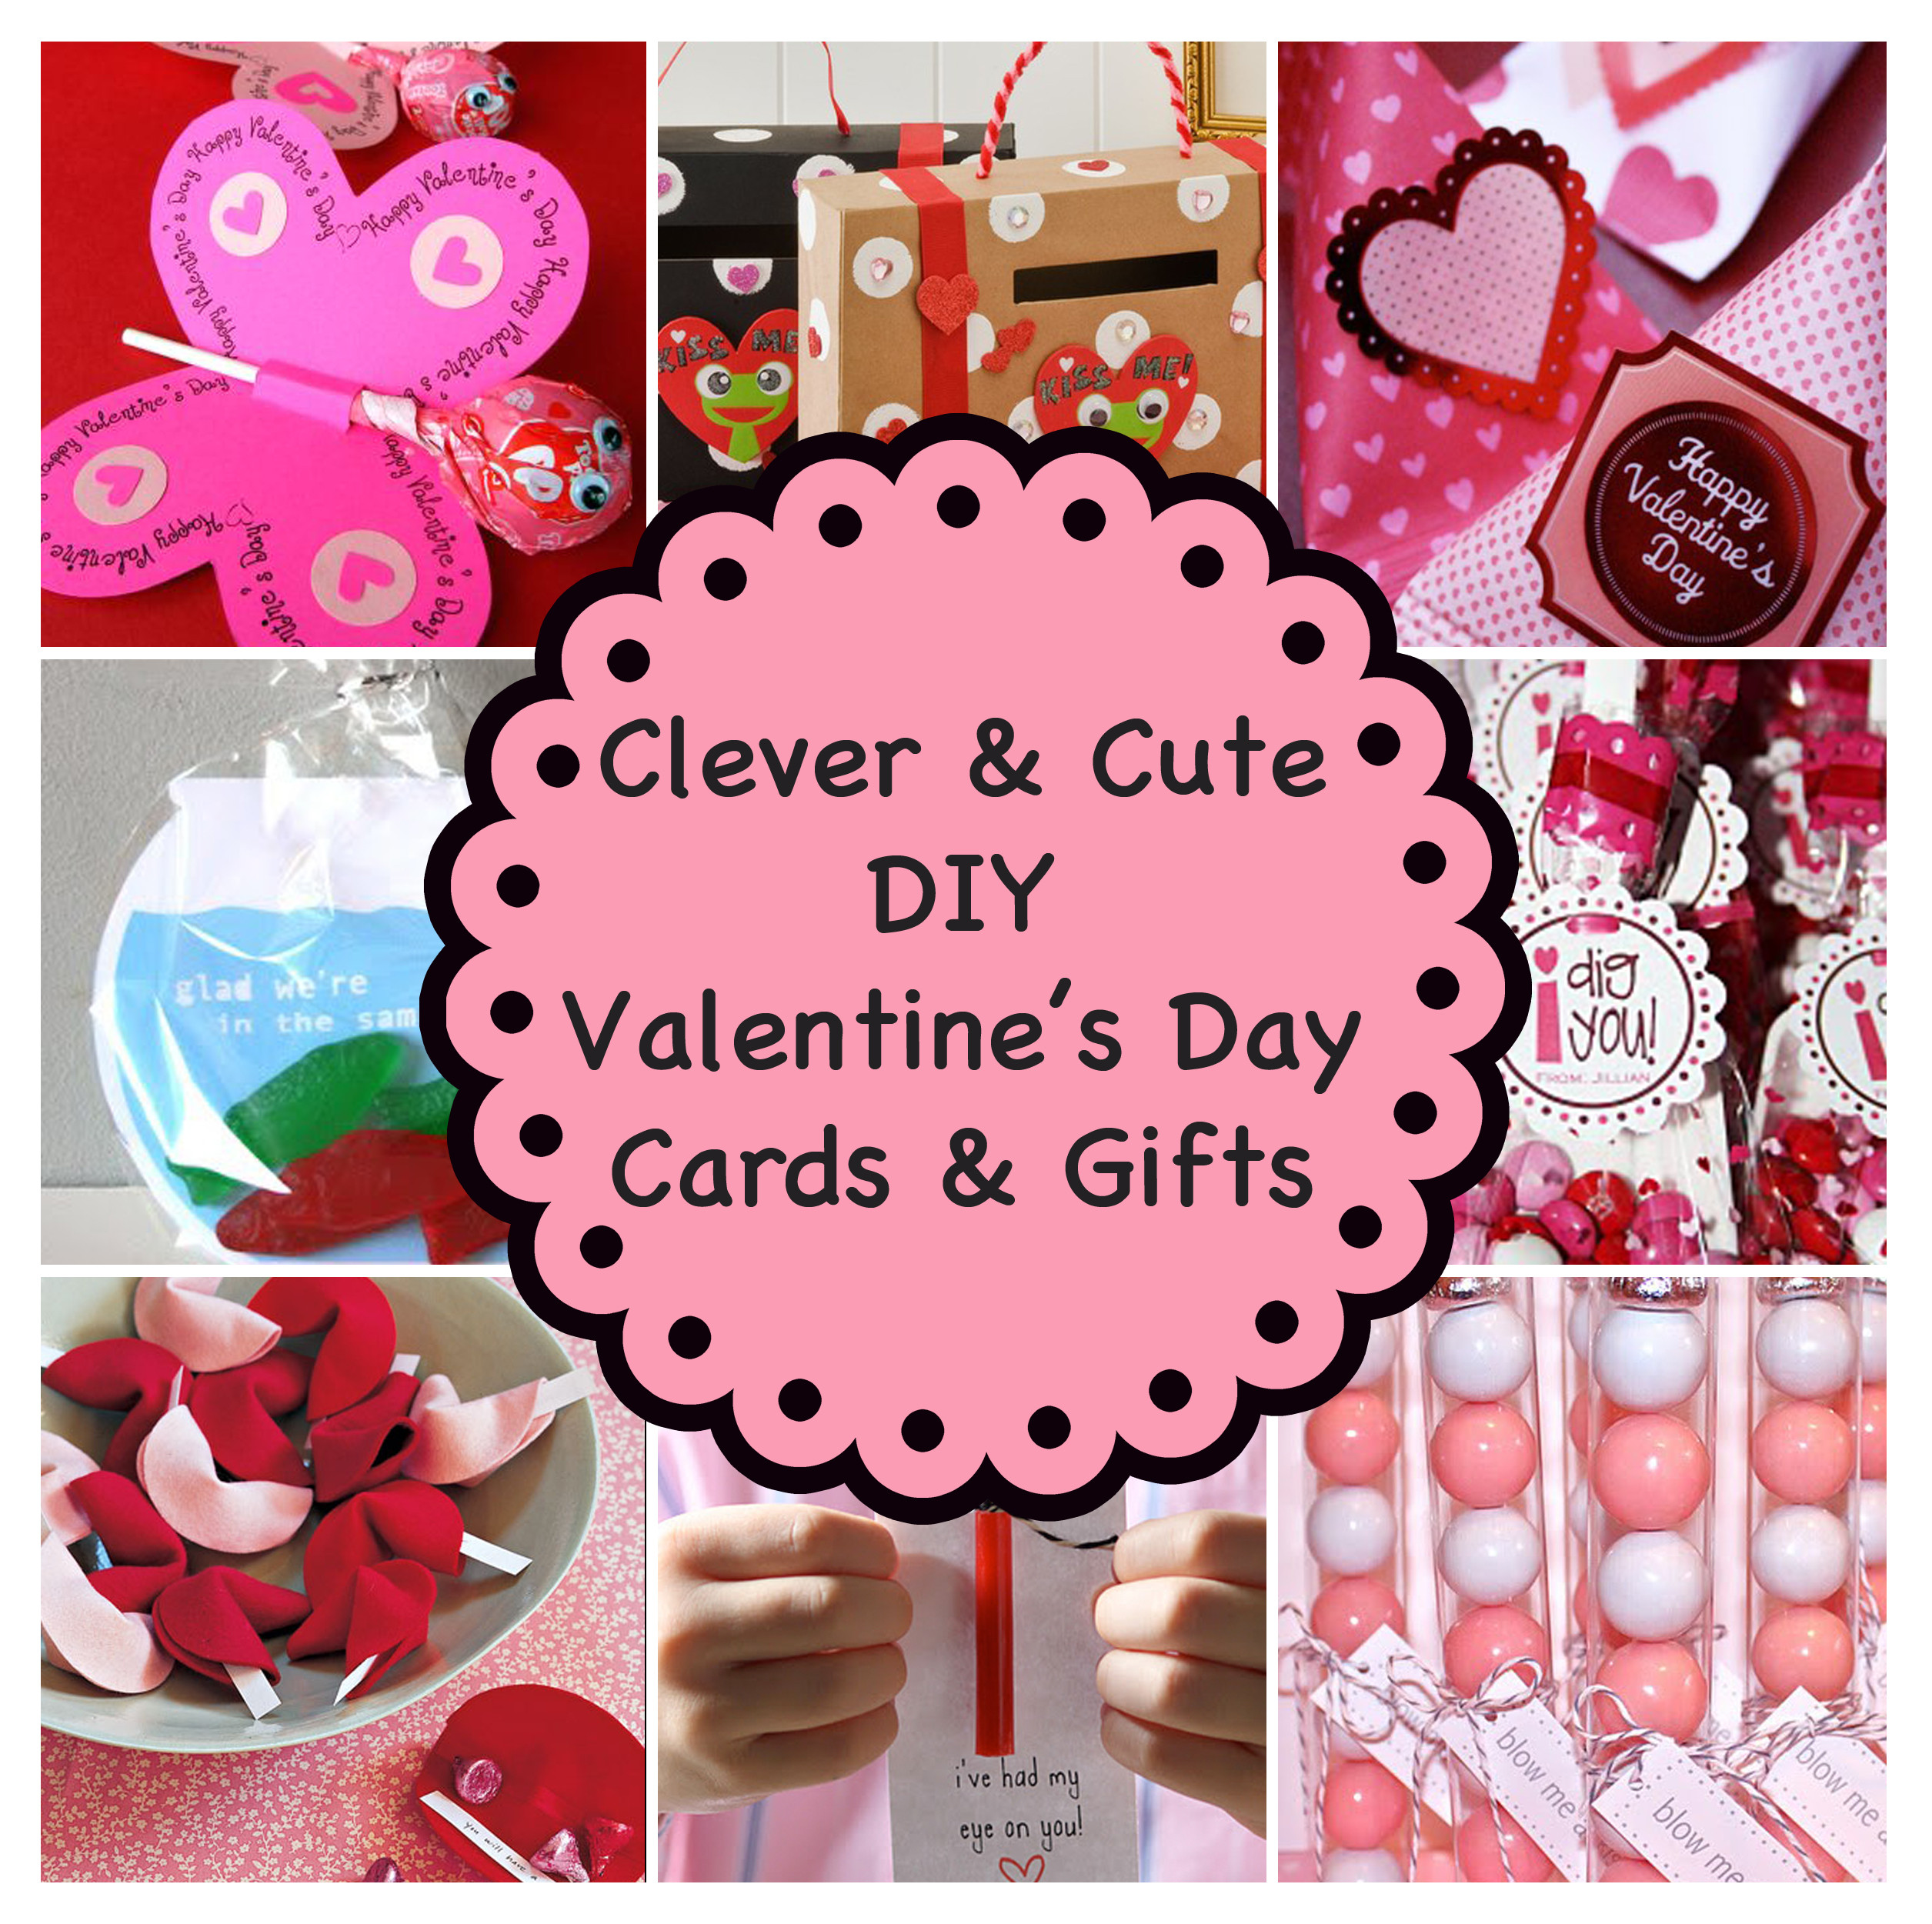 Cute Valentine Gift Ideas
 Clever and Cute DIY Valentine’s Day Cards & Gifts